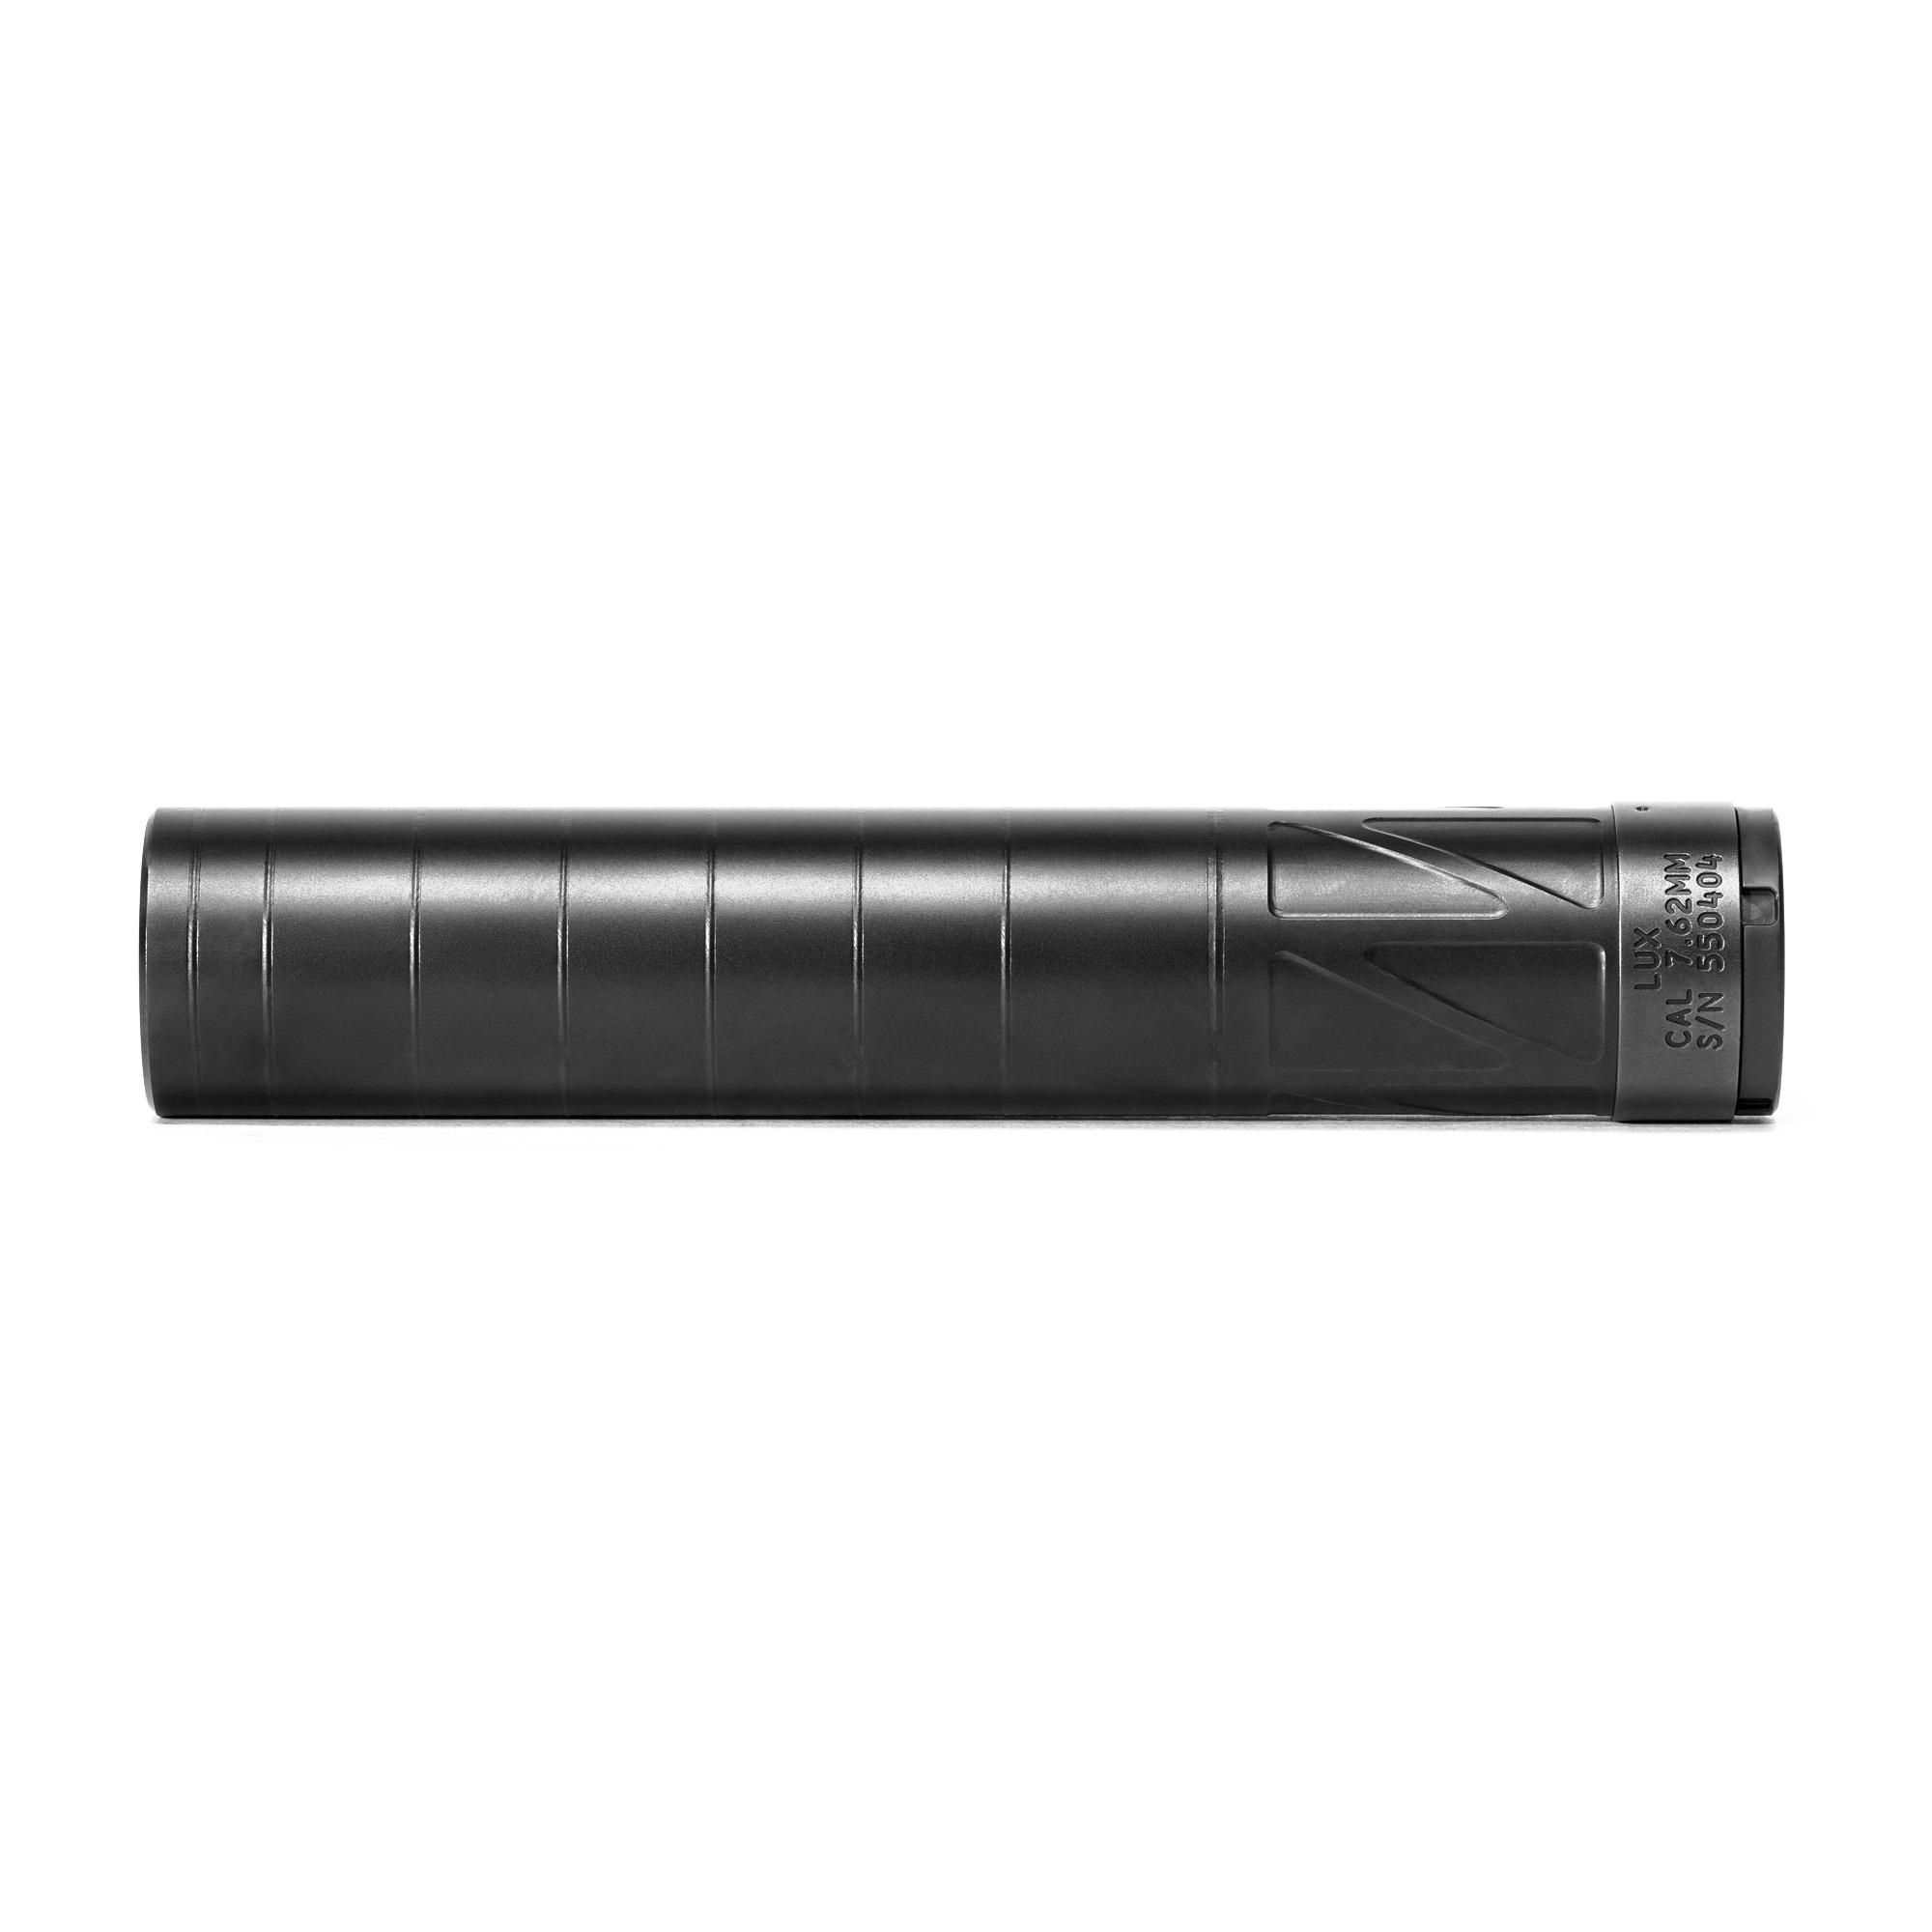 Rifle ENERGETIC LUX SILENCER 7.62 DARK GRY image 1